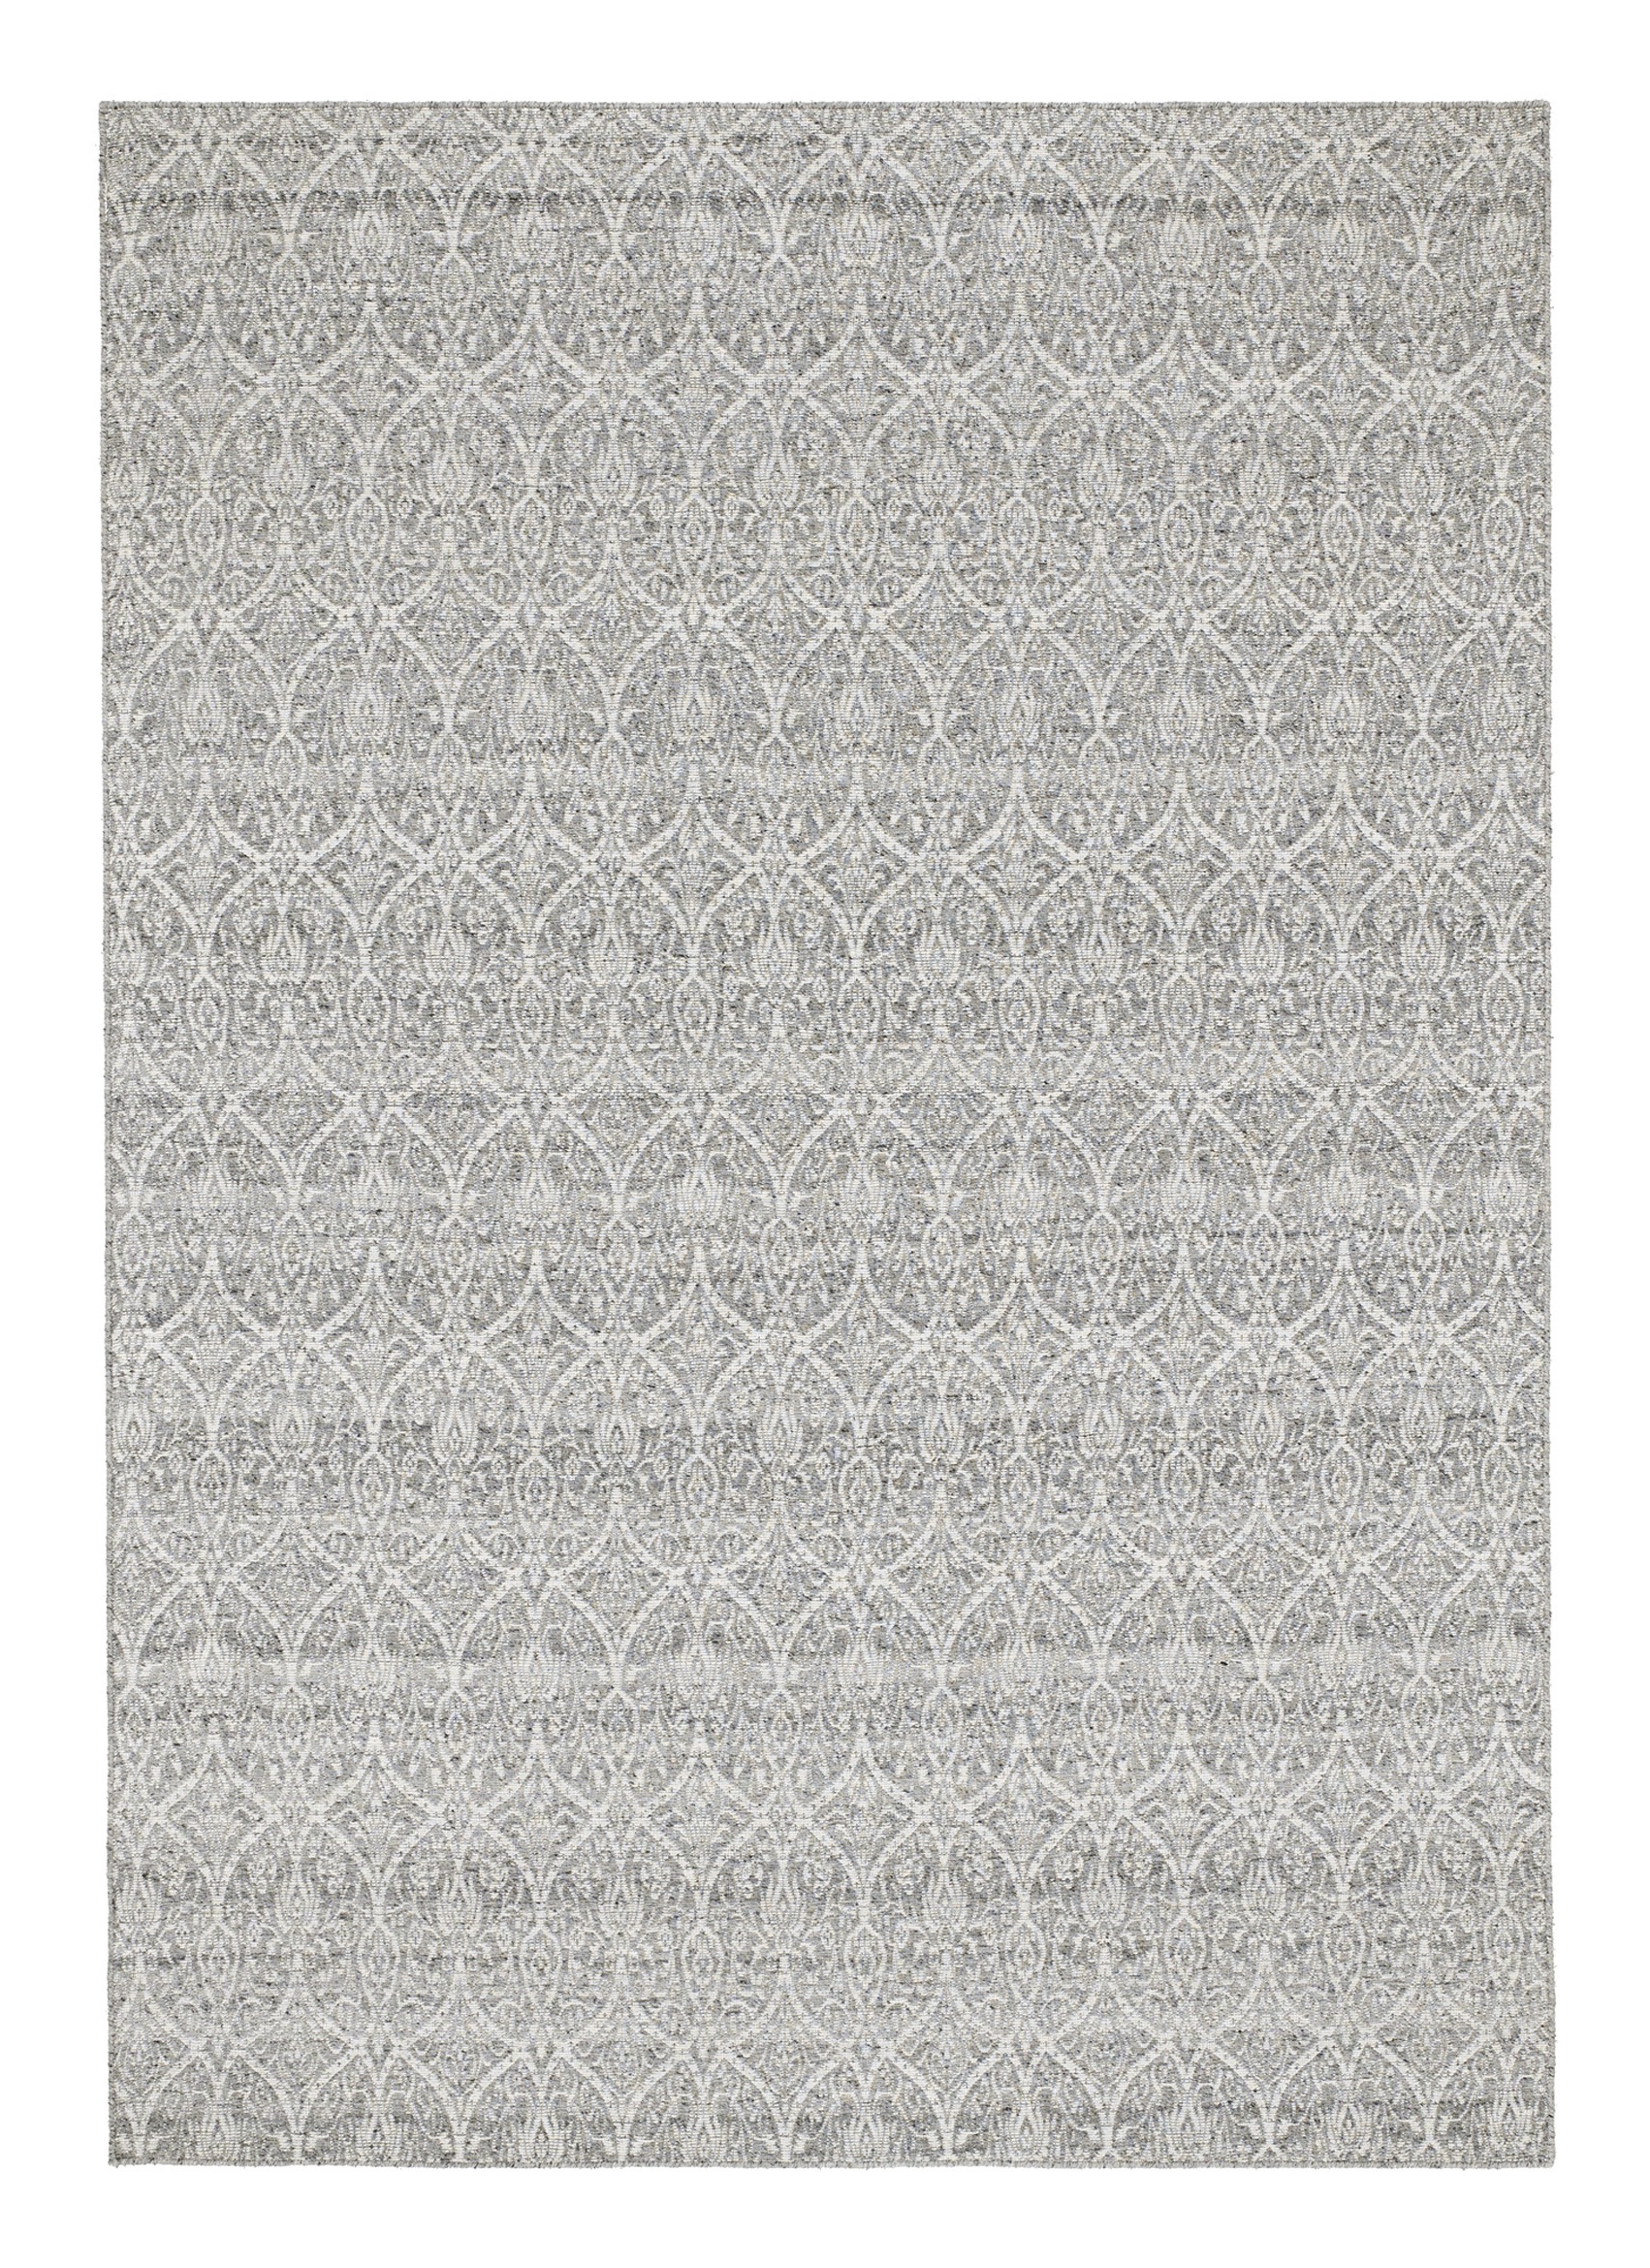 Musterring Deluxe Collection Malibu Teppich in Silber 